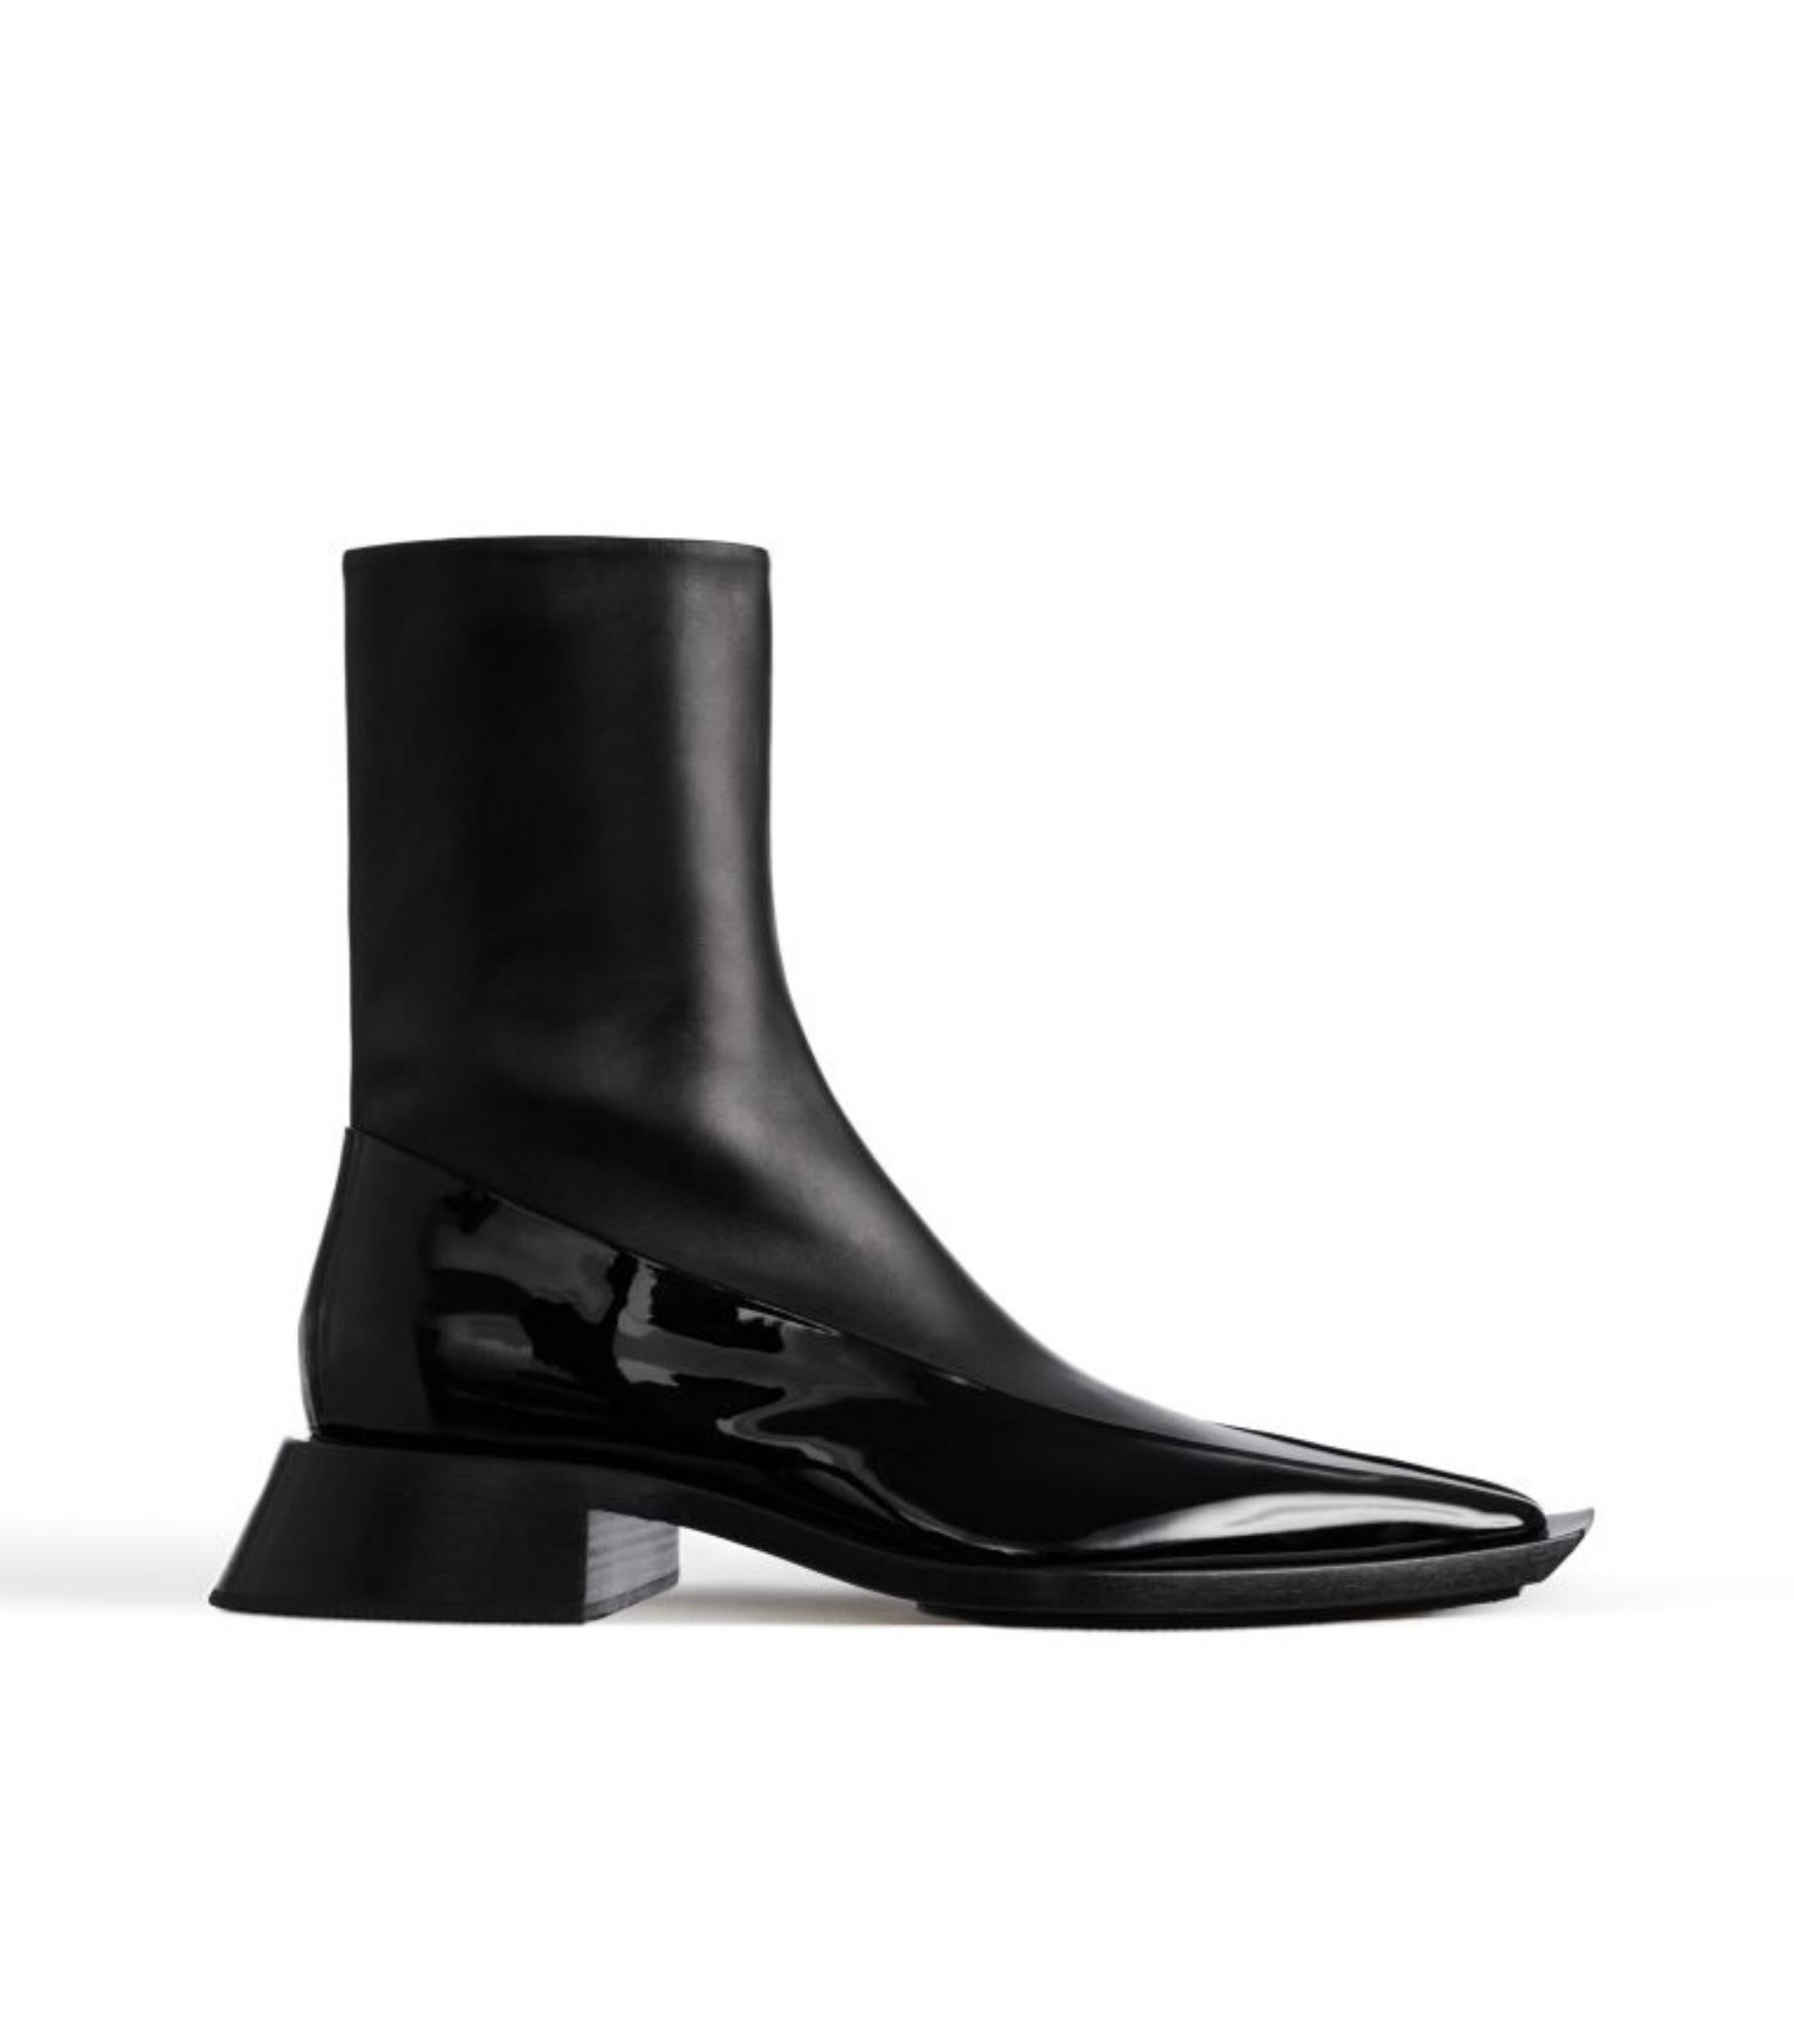 Mugler H&M Leather ankle boots black size US 8.5 EUR 41 UK 7.5 Limited Edition In New Condition For Sale In London, GB